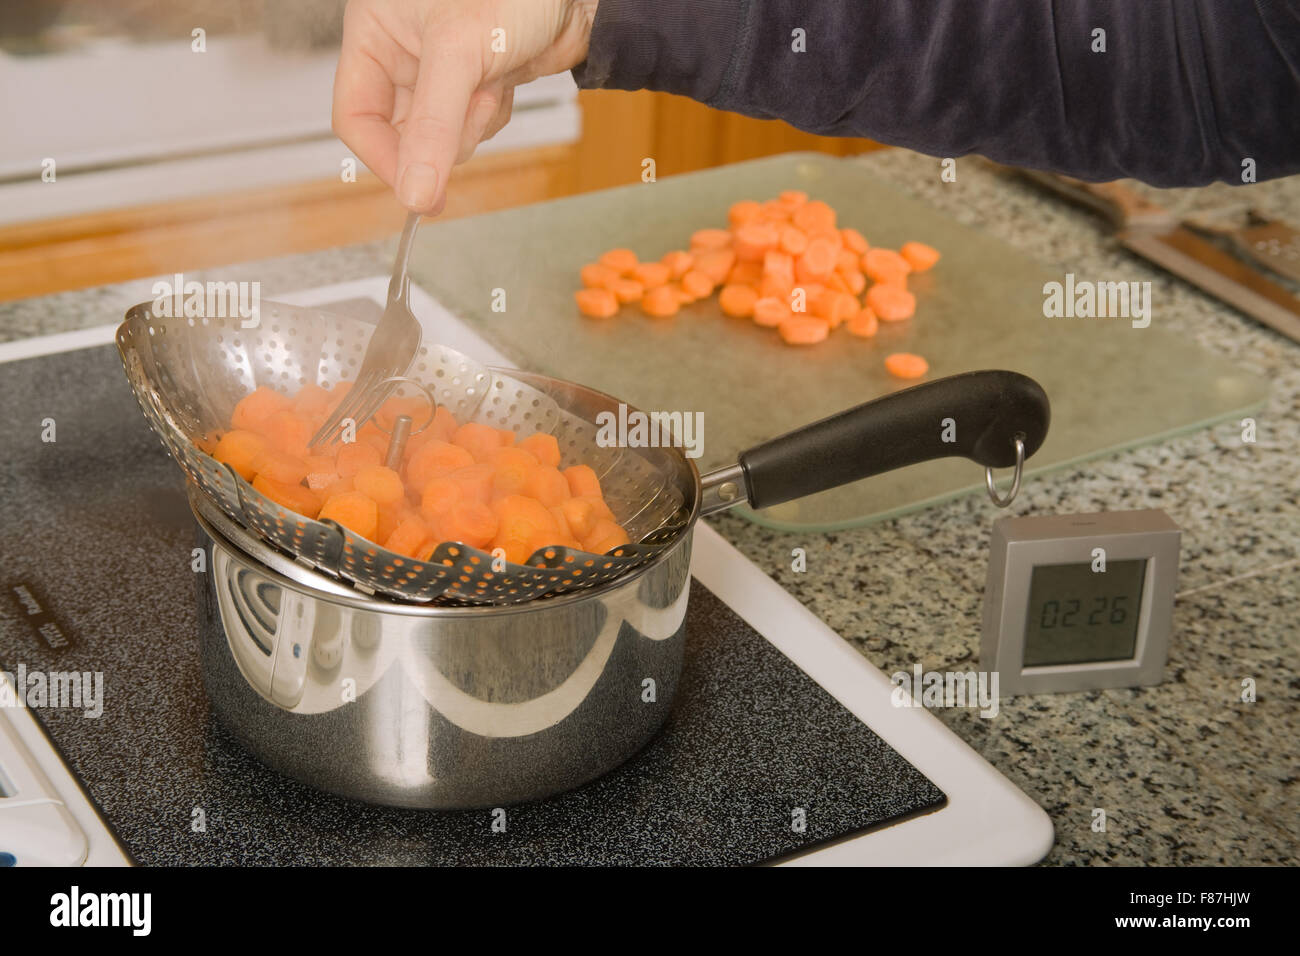 Blanching Vegetables In Big Cooking Pot Preparation Stock Photo